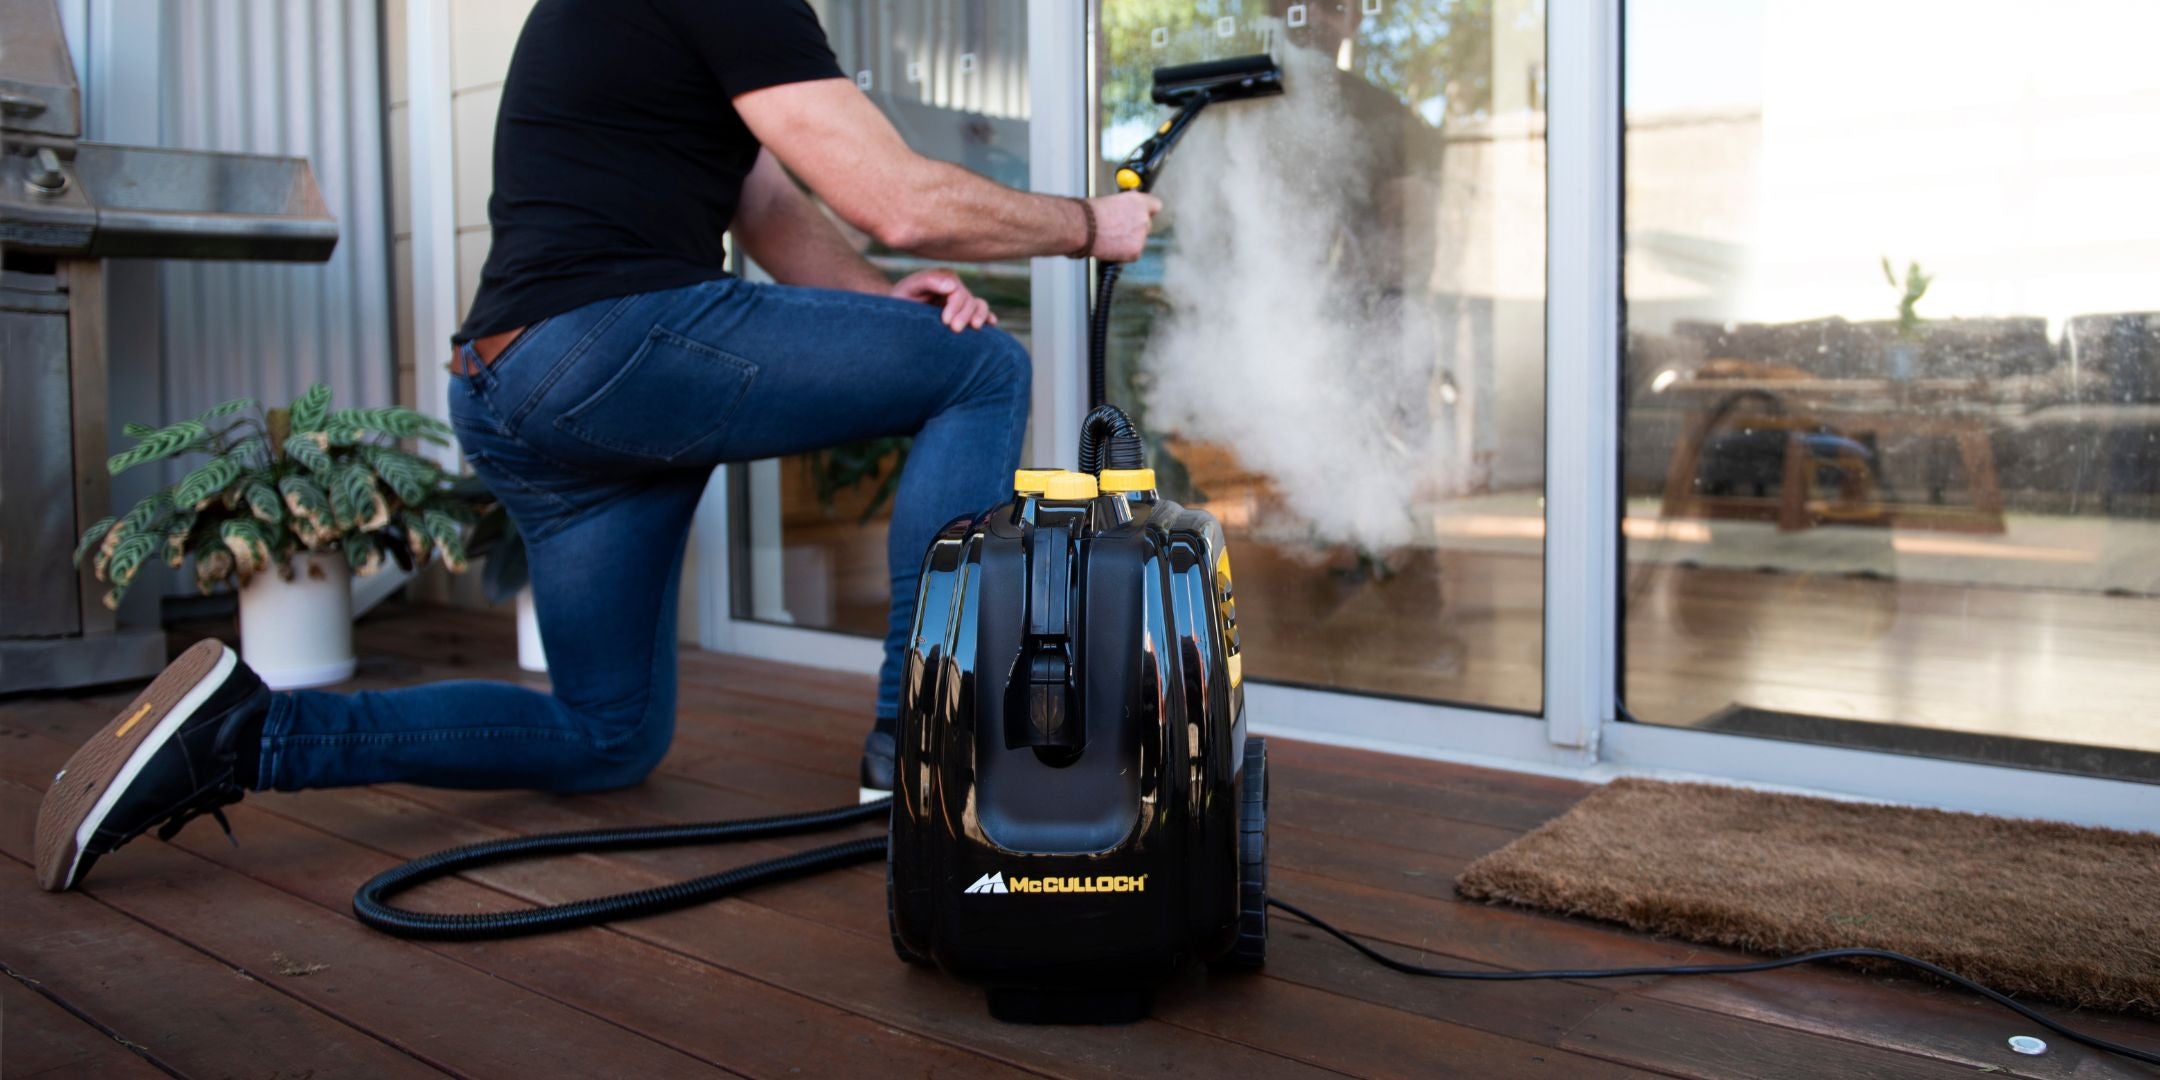 Man kneeling down to use McCulloch Outdoor & BBQ Steam Cleaner to steam clean window glass outside on the deck.